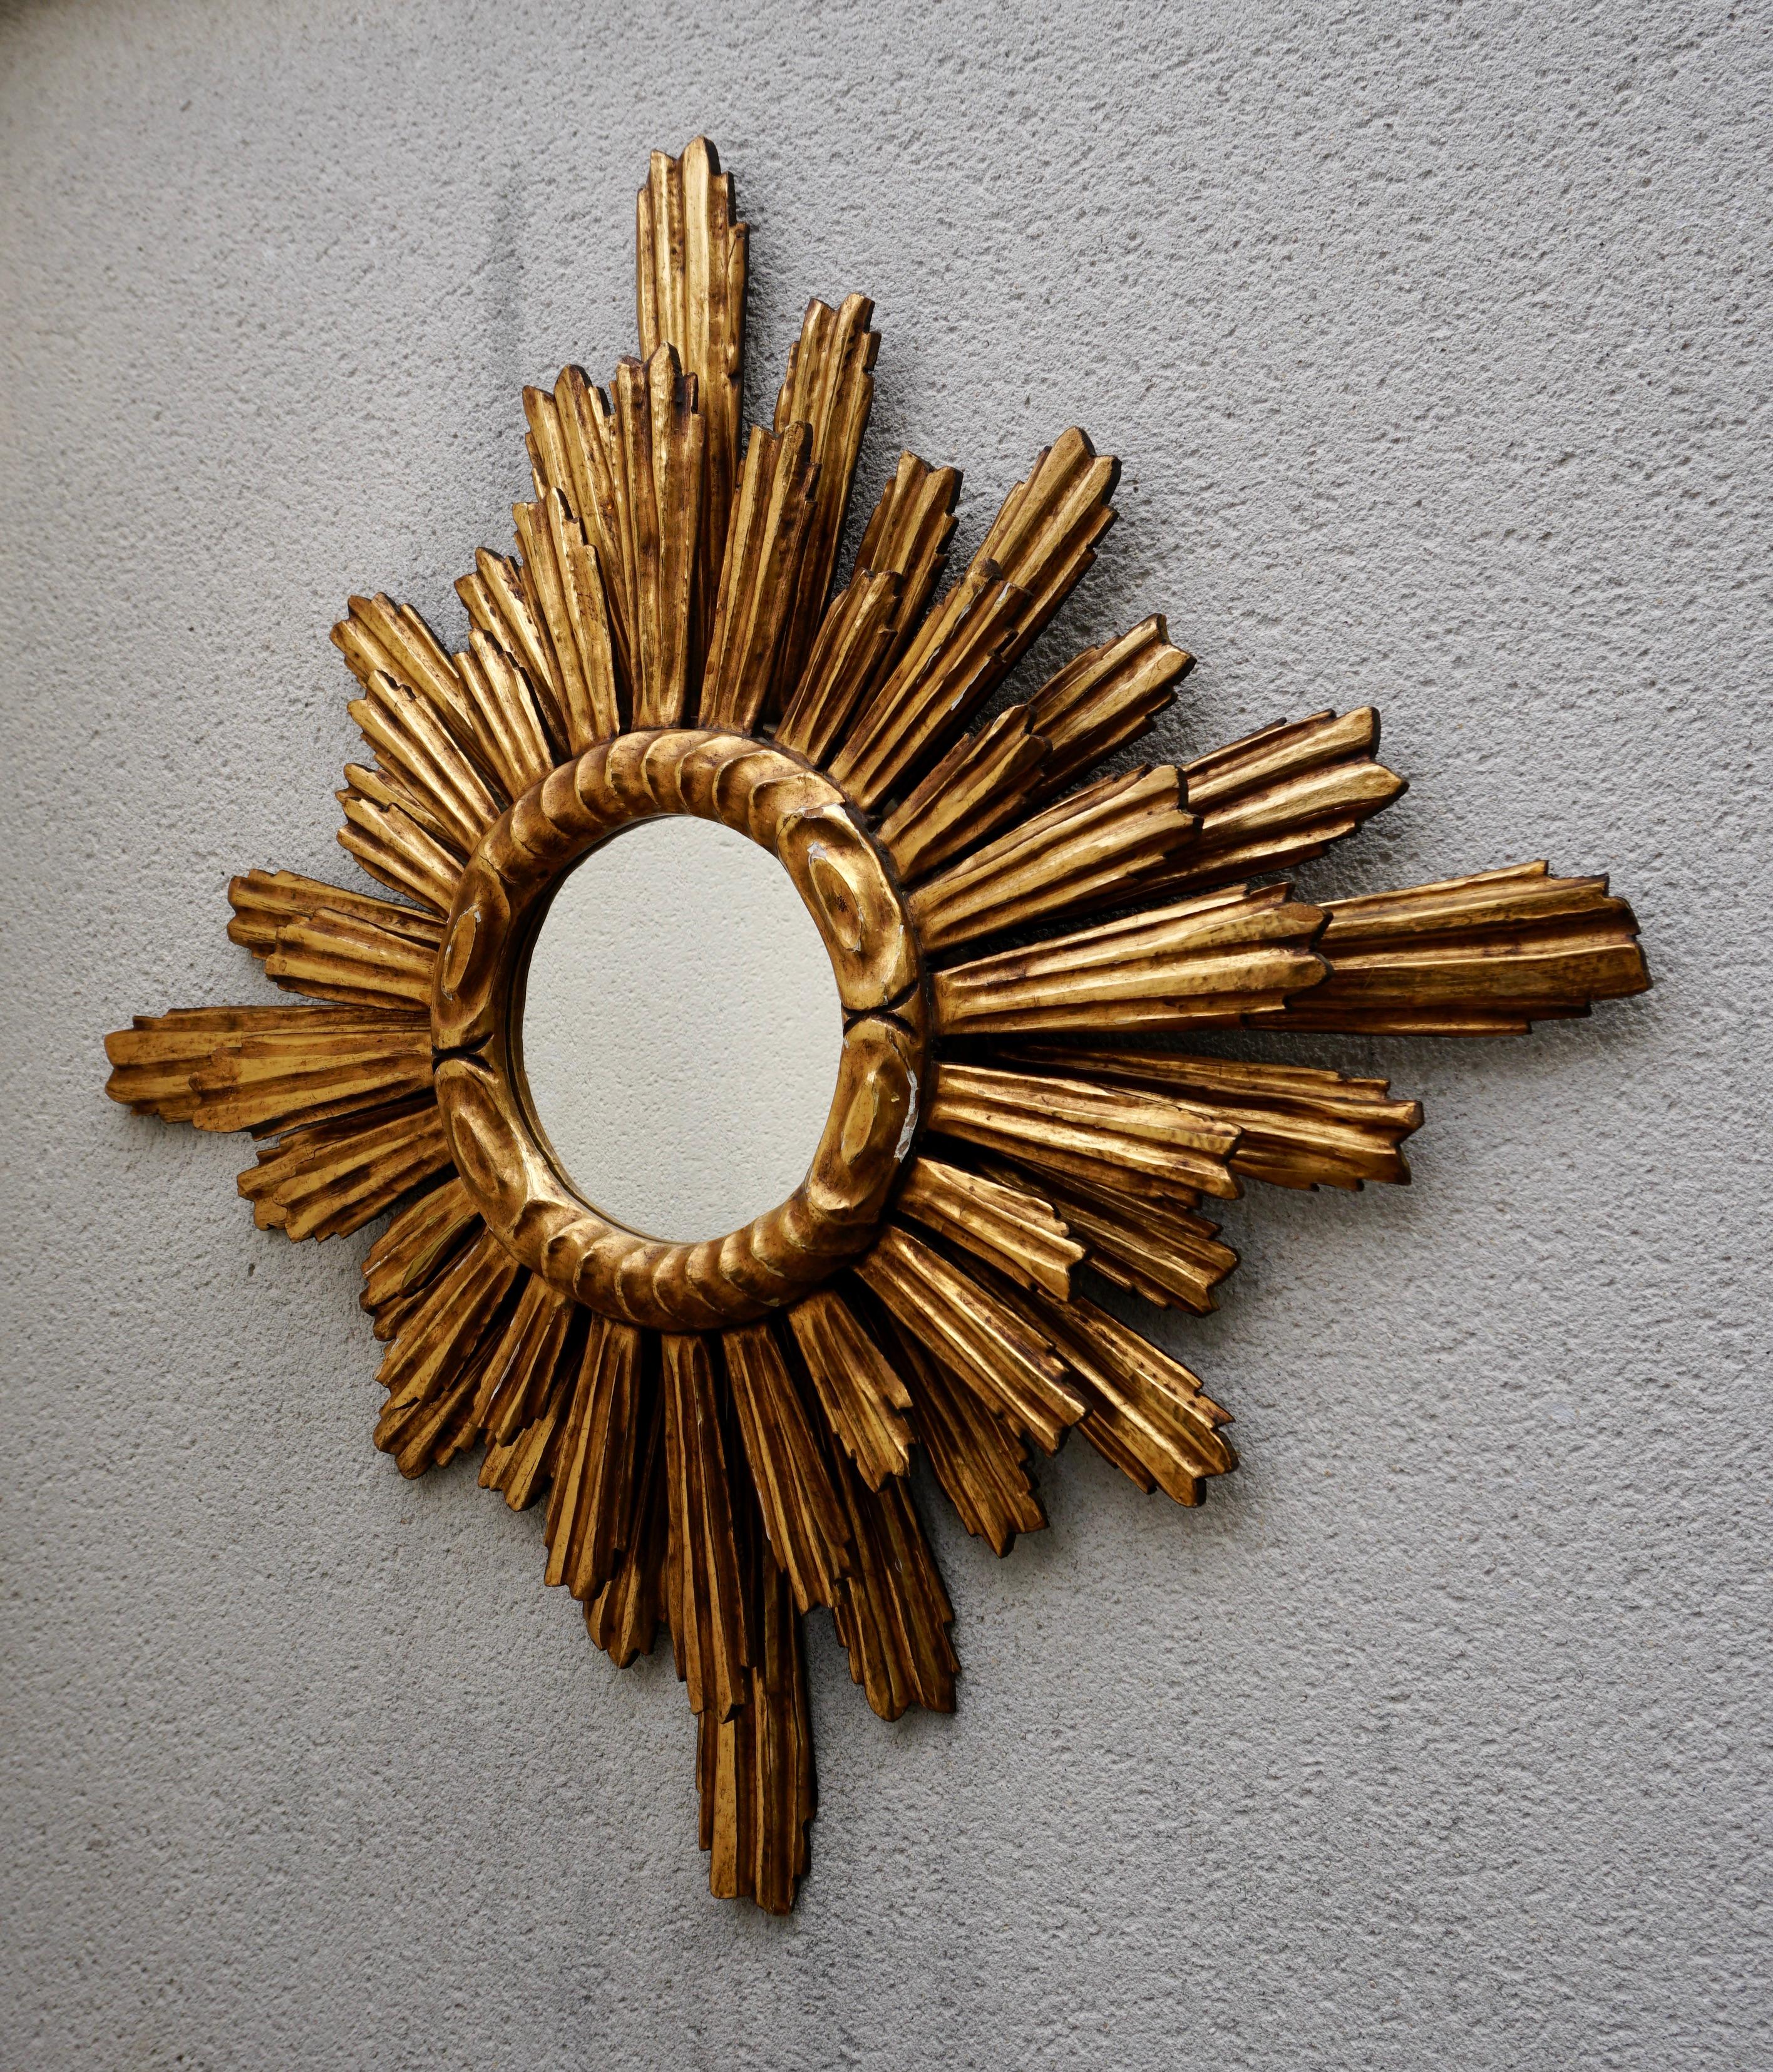 A gorgeous sunburst mirror. Made of gilded wood and in good vintage condition. 
It measures  31.4